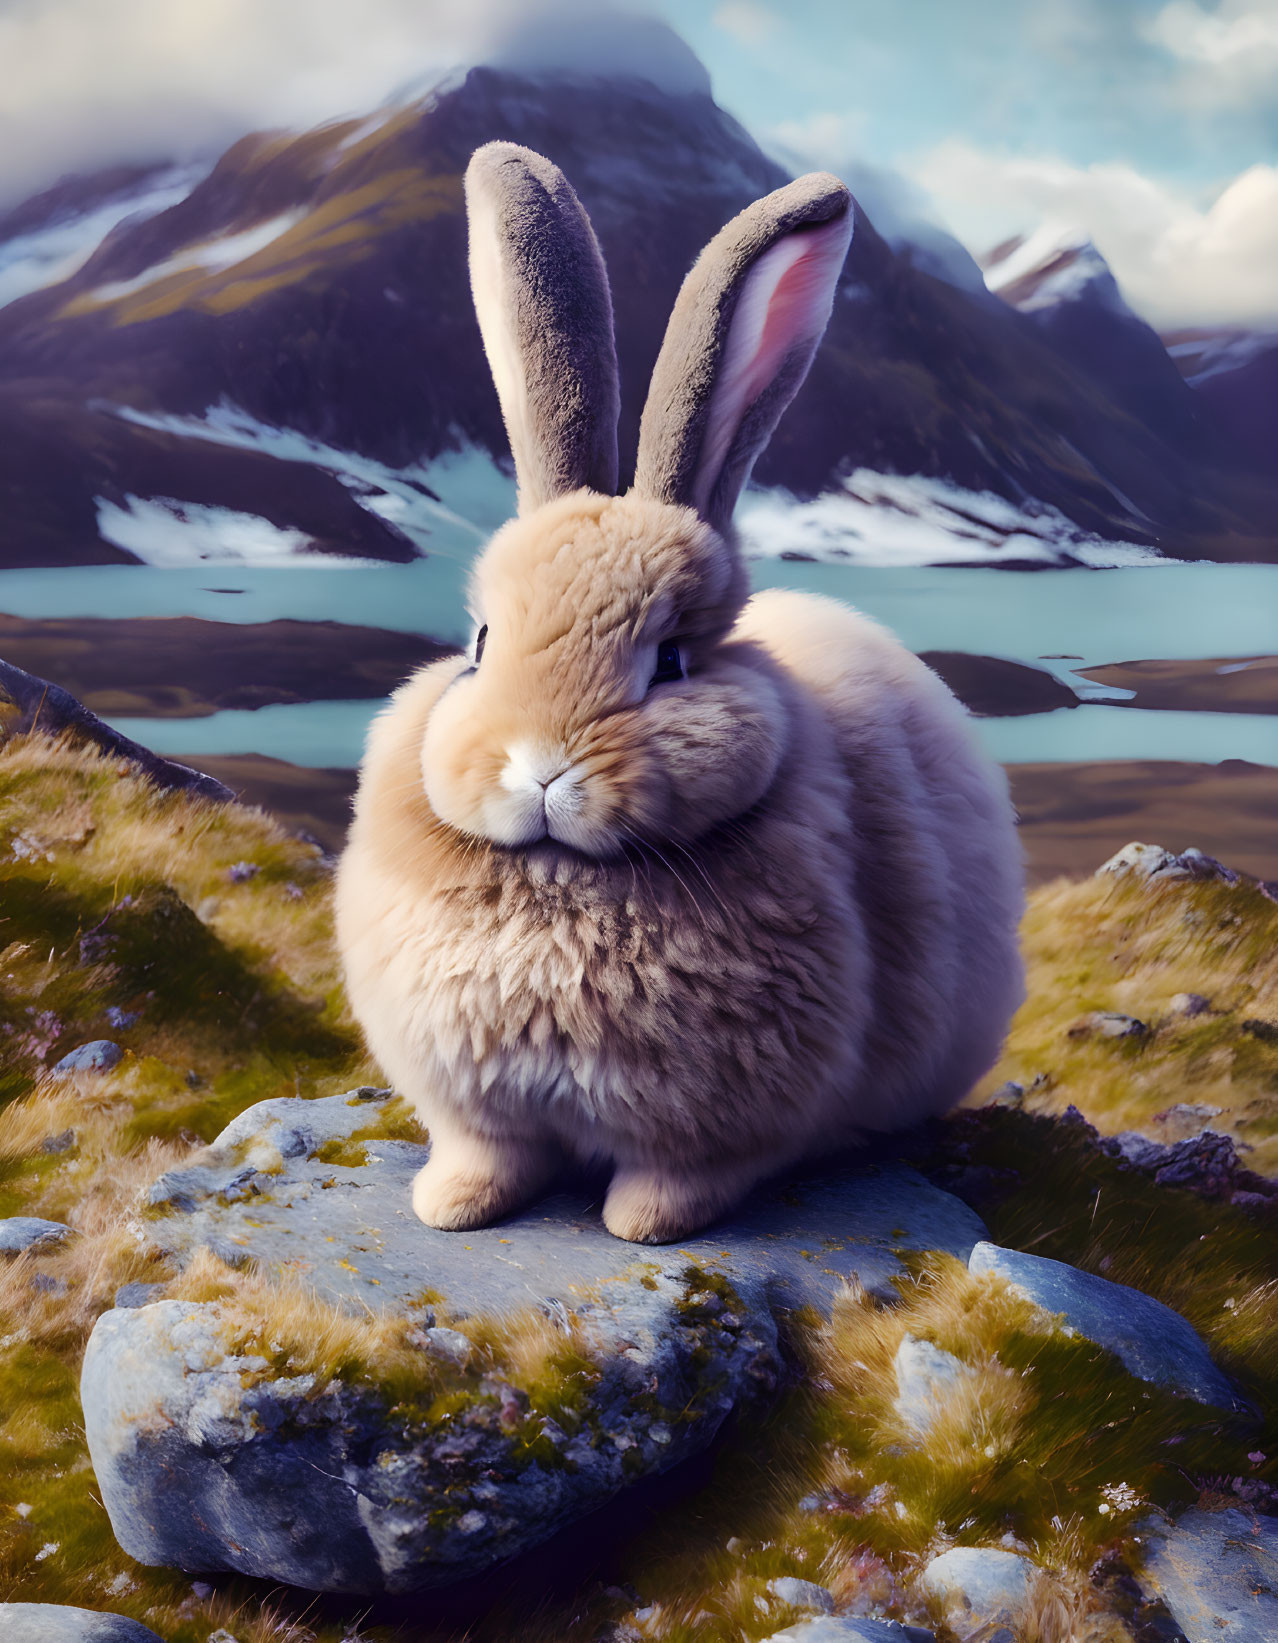 Fluffy brown rabbit on rock with snow-capped mountains and lake scenery